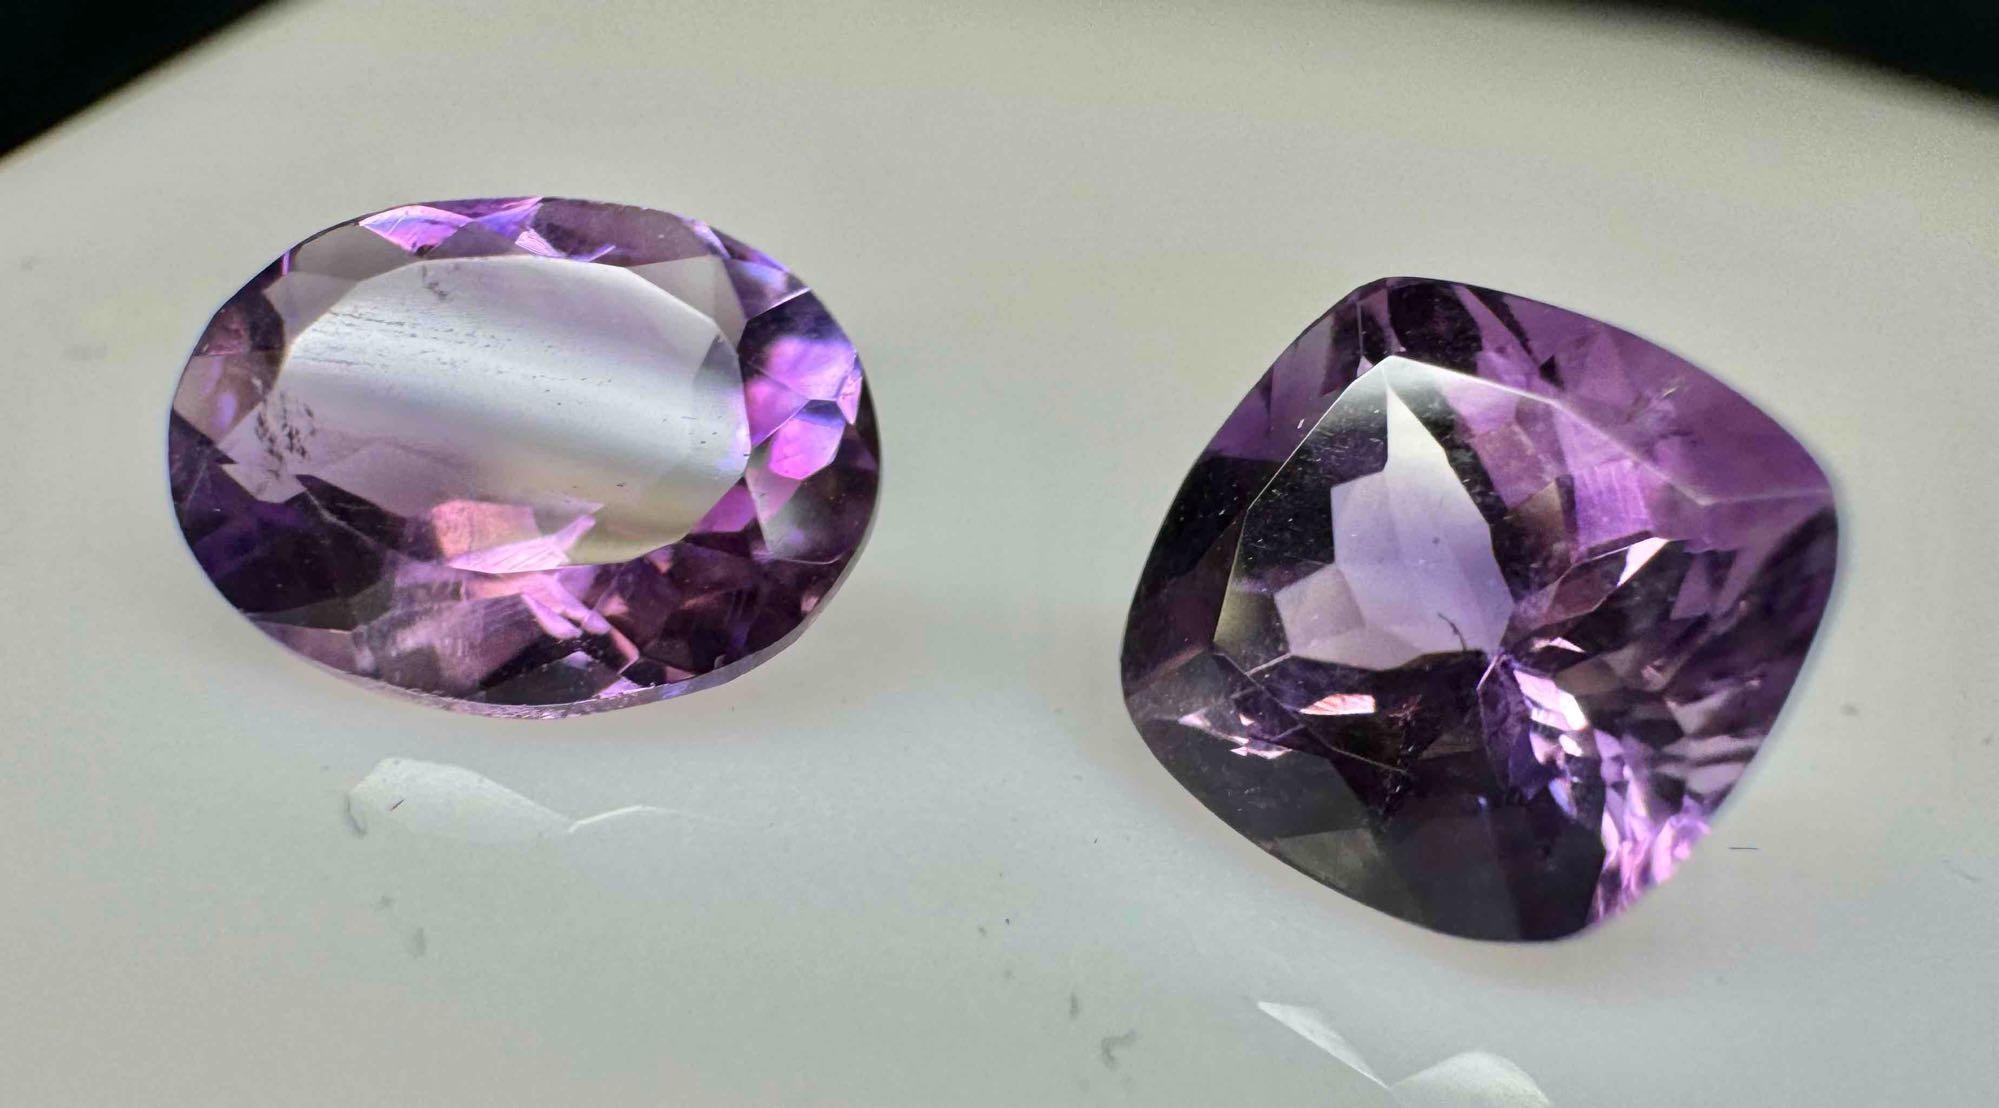 Pair of Amethyst Gemstones Oval and Square Cut 5.9ct total